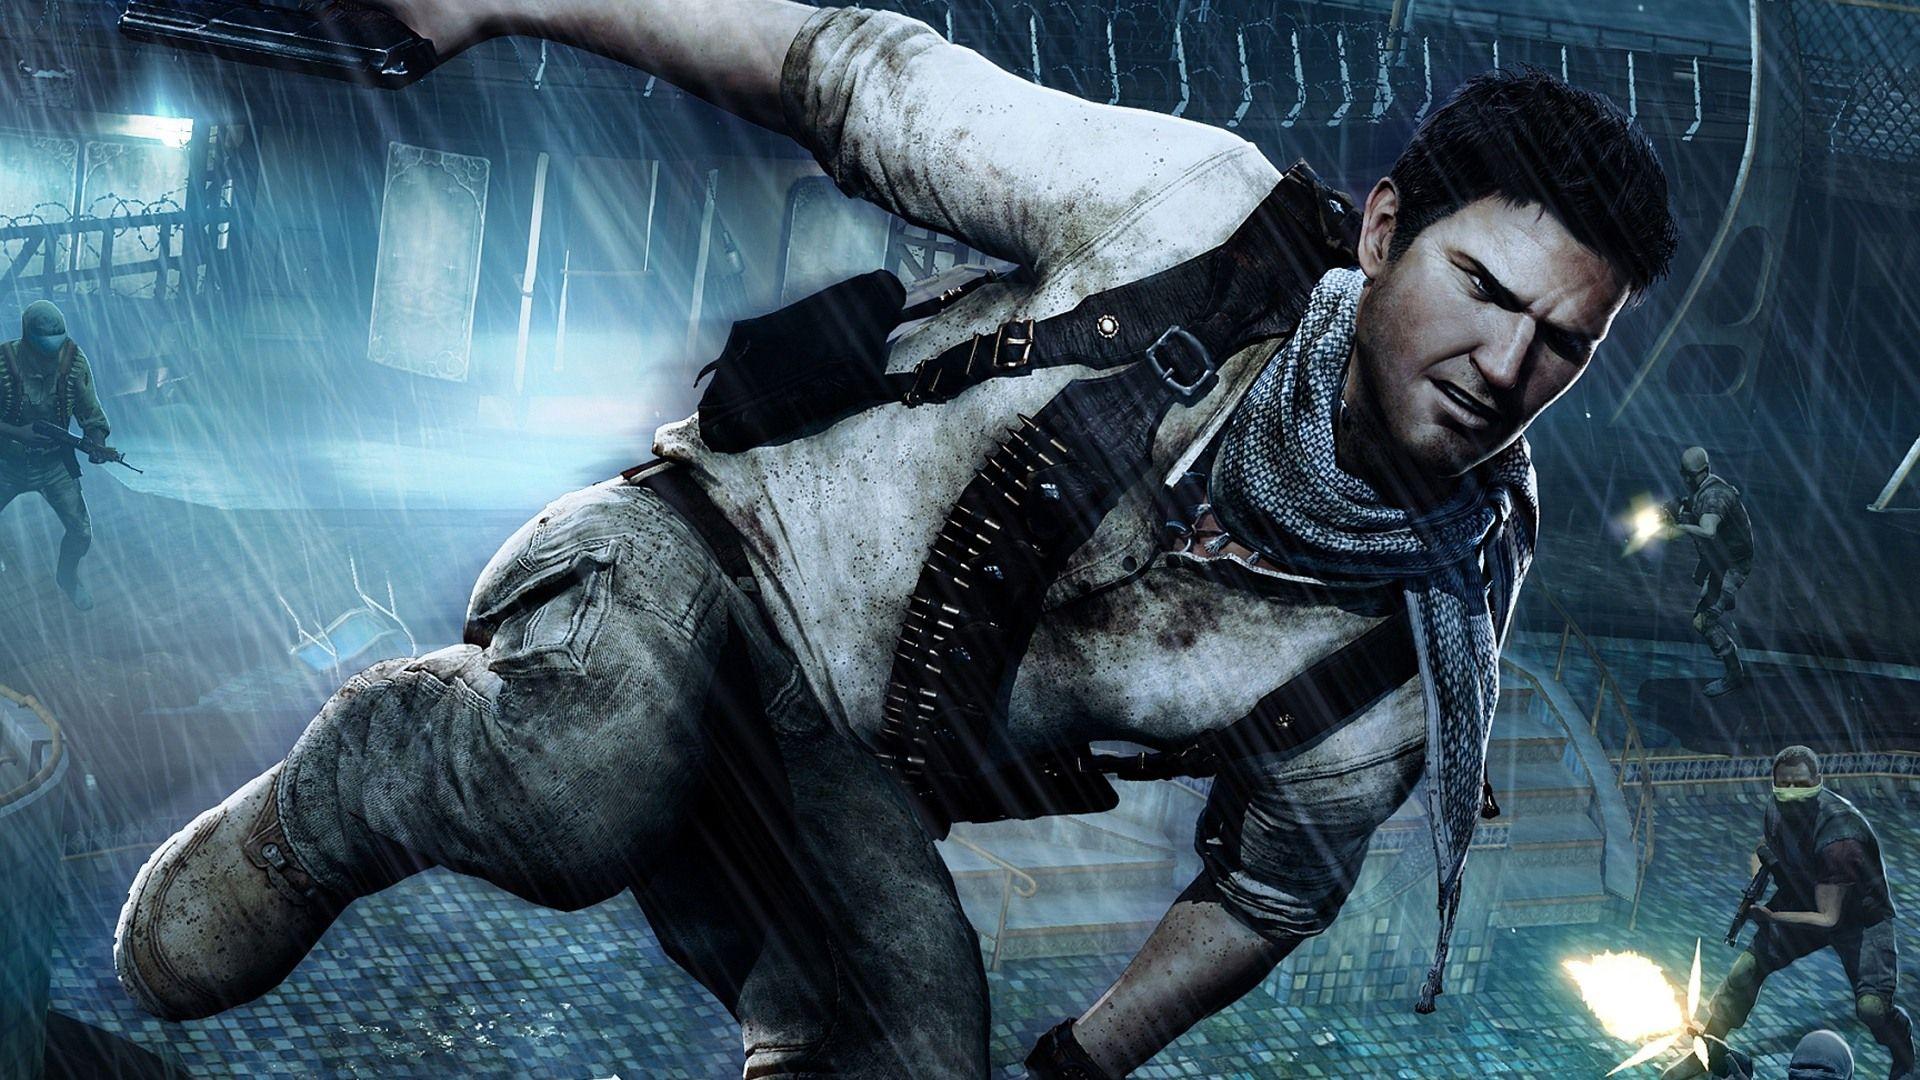 Uncharted 3: Drake's Deception Full HD Wallpaper and Background